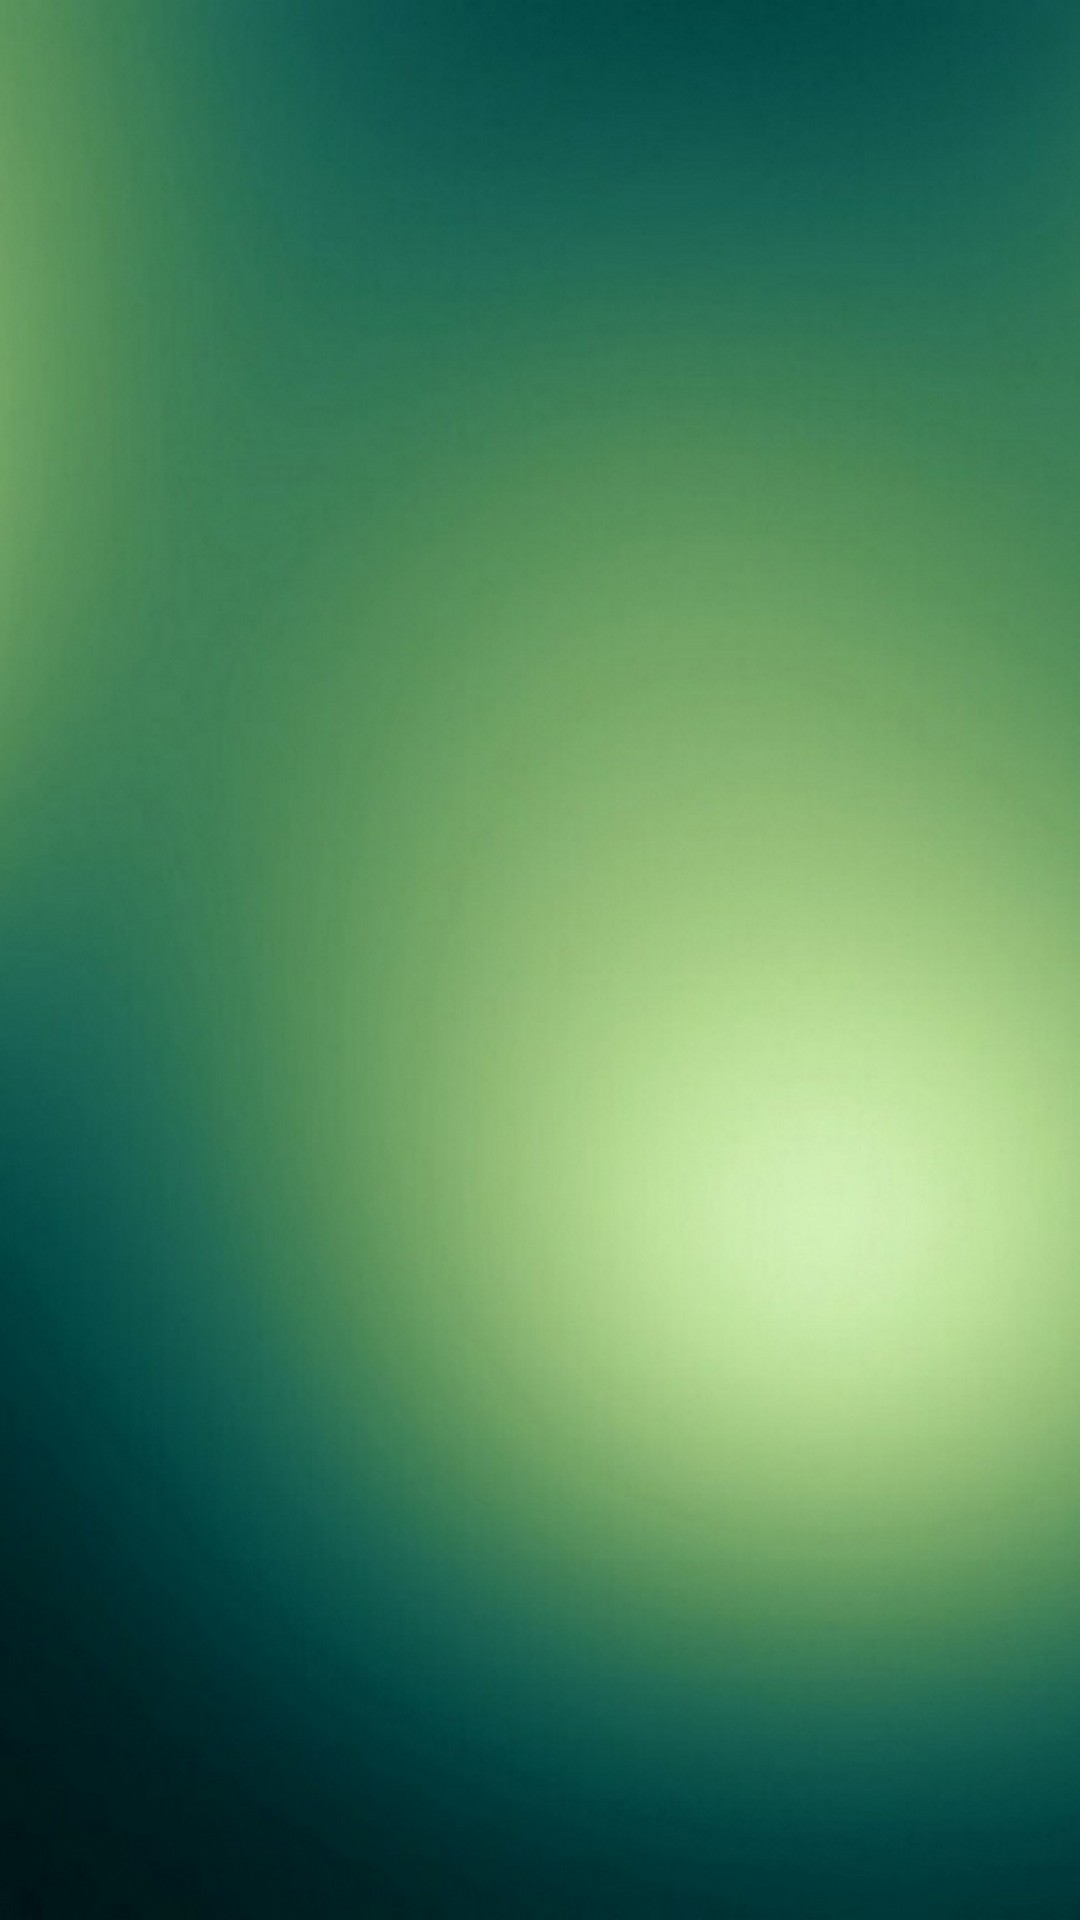 Wallpaper Emerald Green Android With Image Resolution - Background Mint Green Iphone - HD Wallpaper 